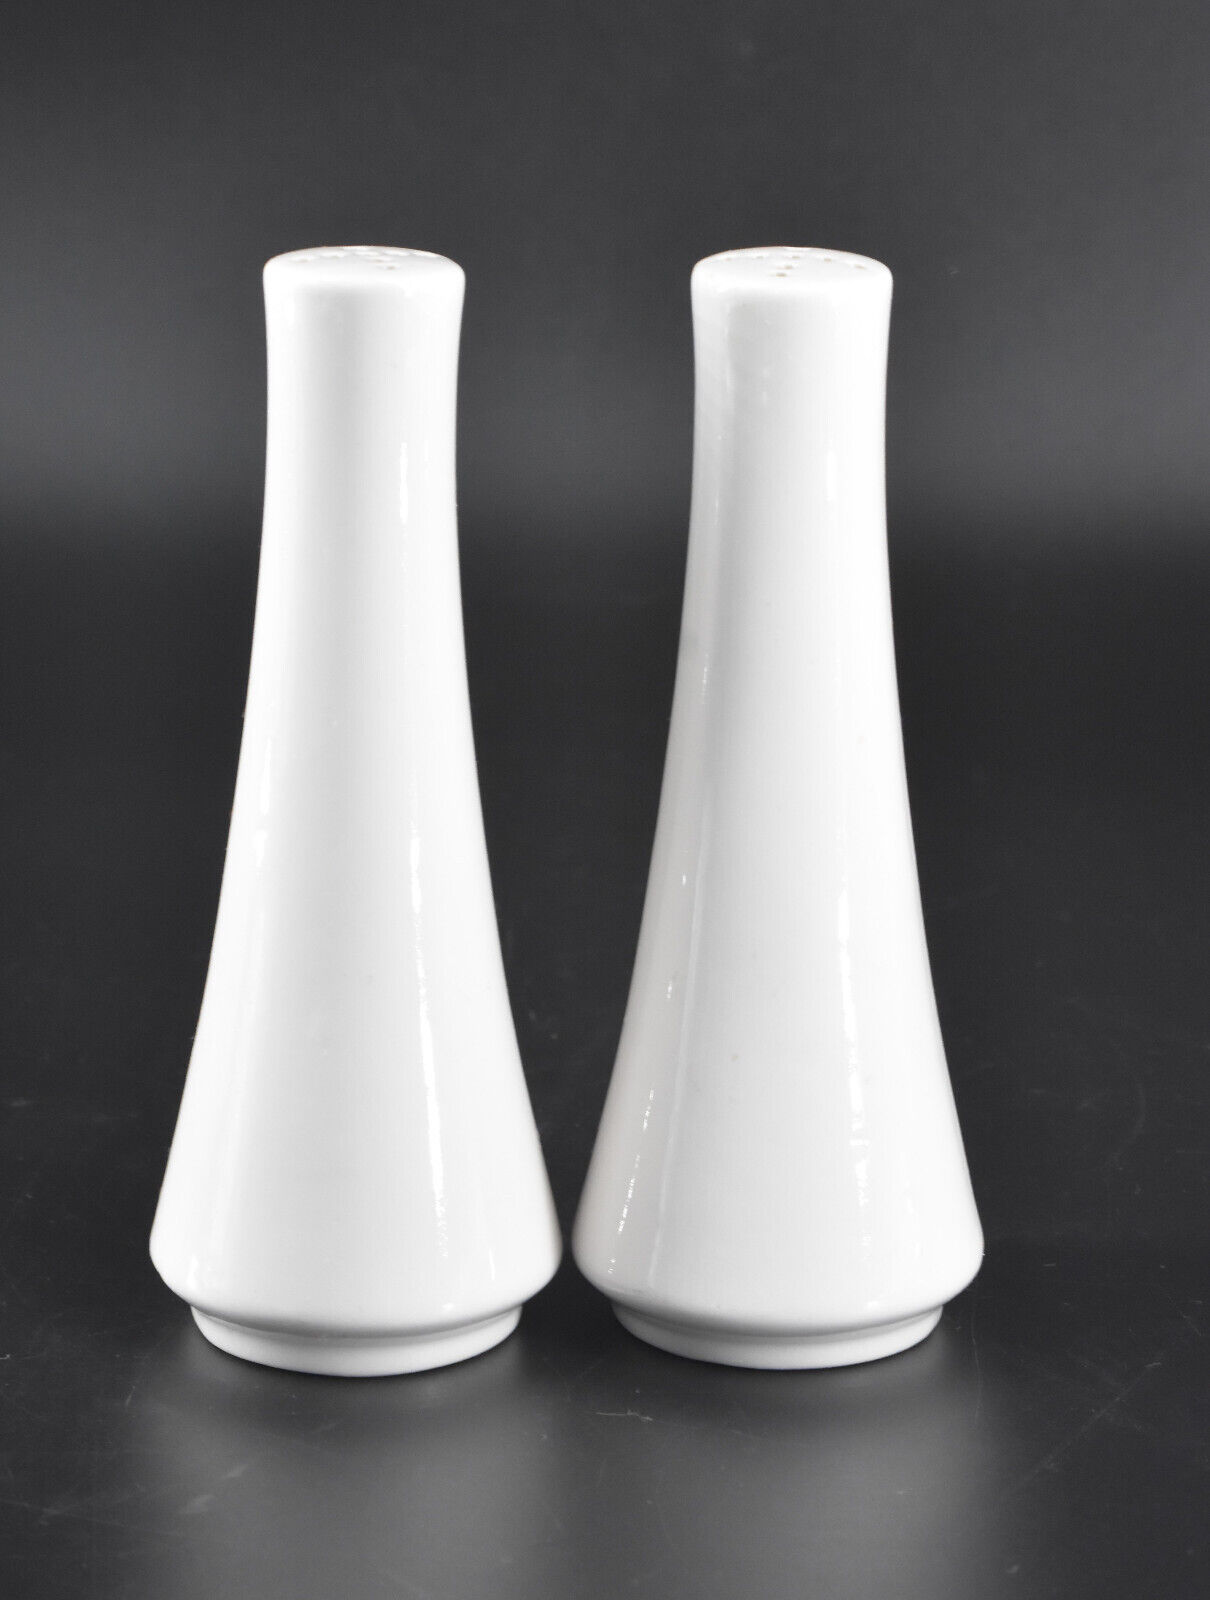 Vintage White Ceramic Hourglass Silo-Shaped Salt and Pepper Shakers Japan 6\